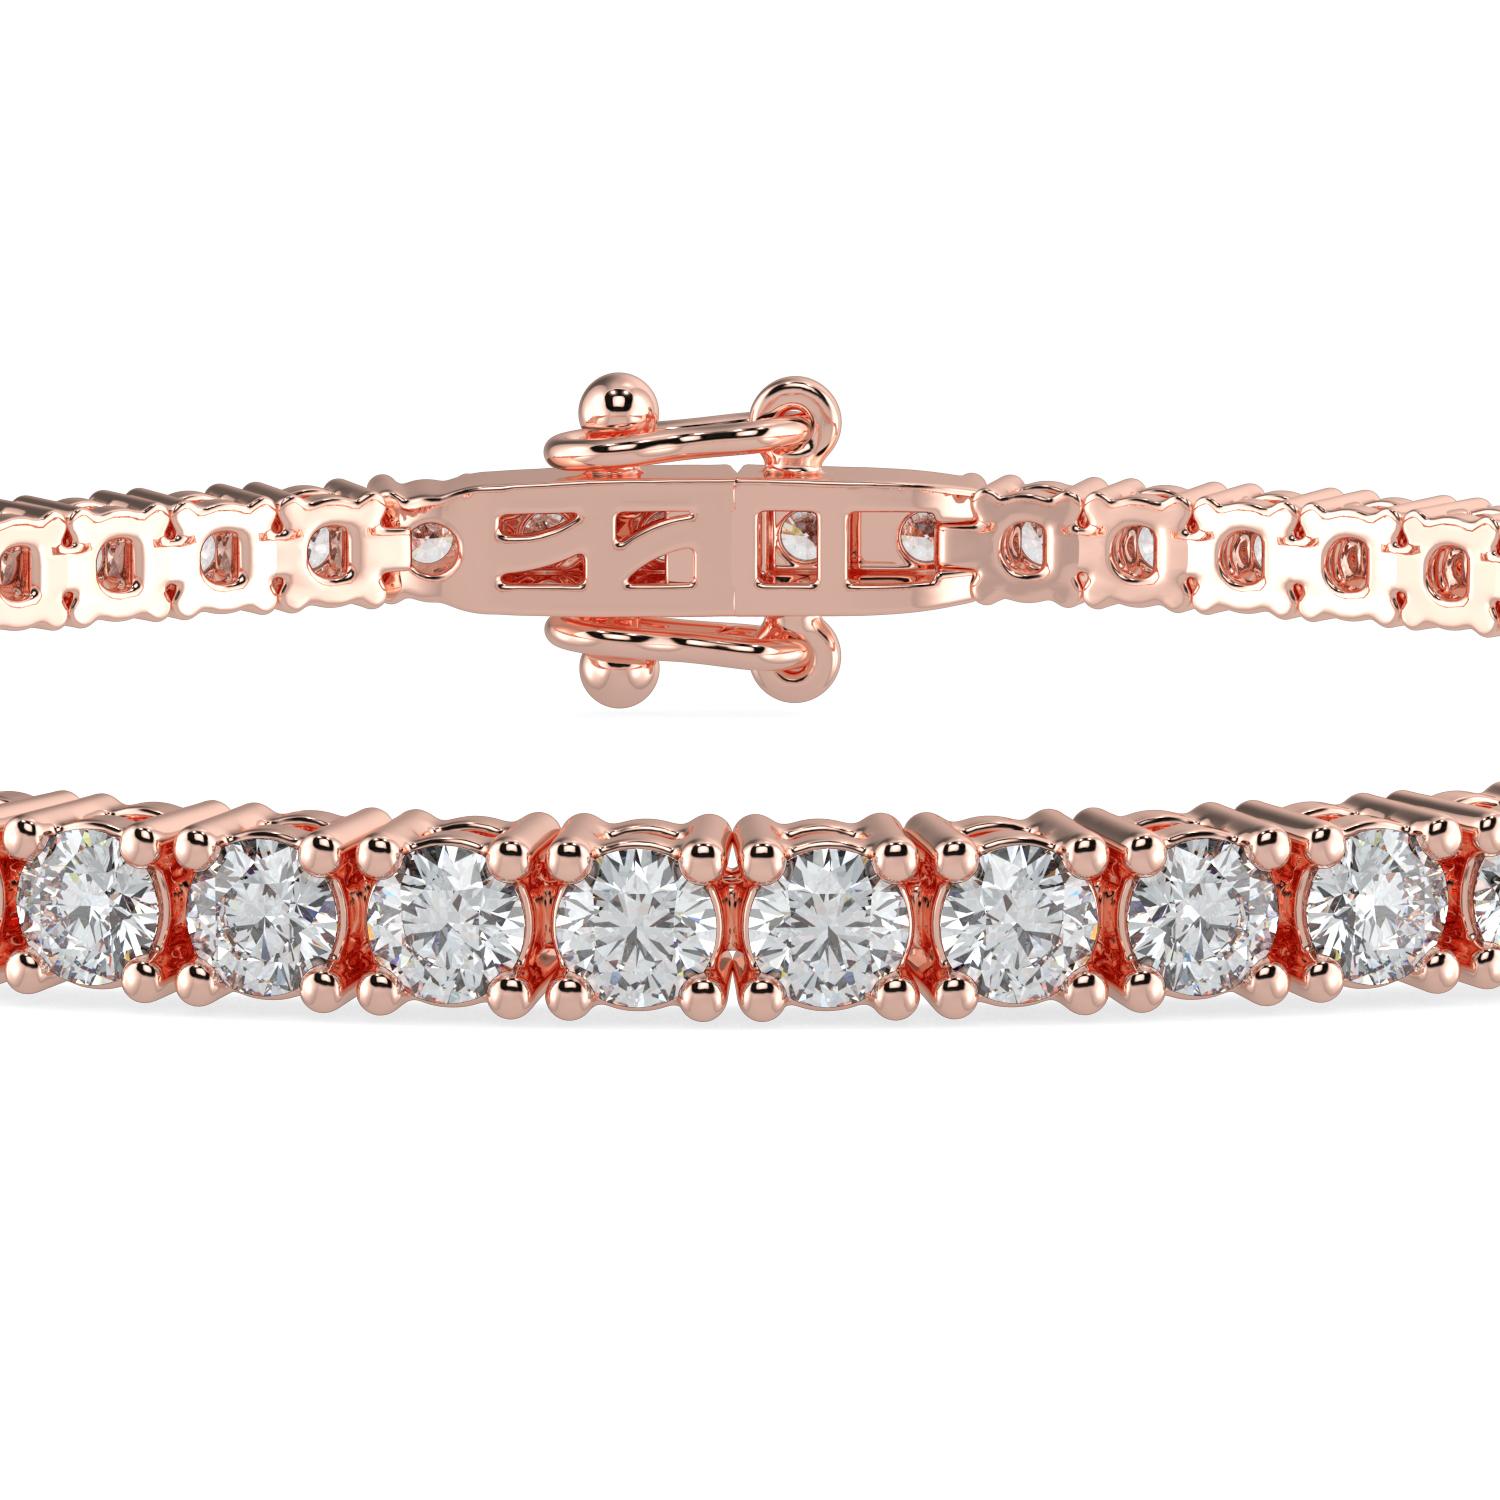 1.00 Carat Round Cut GH-SI Natural Diamond Classic Tennis Bracelet 4 Prong 14K Rose Gold for Women

Specification
Brand: AAMIAA
Length: 7 Inches 
Color: GH
Carat Weight:1CTW
Clarity: SI

LUXURIOUS AND LASTING- Our bracelets are a luxurious and